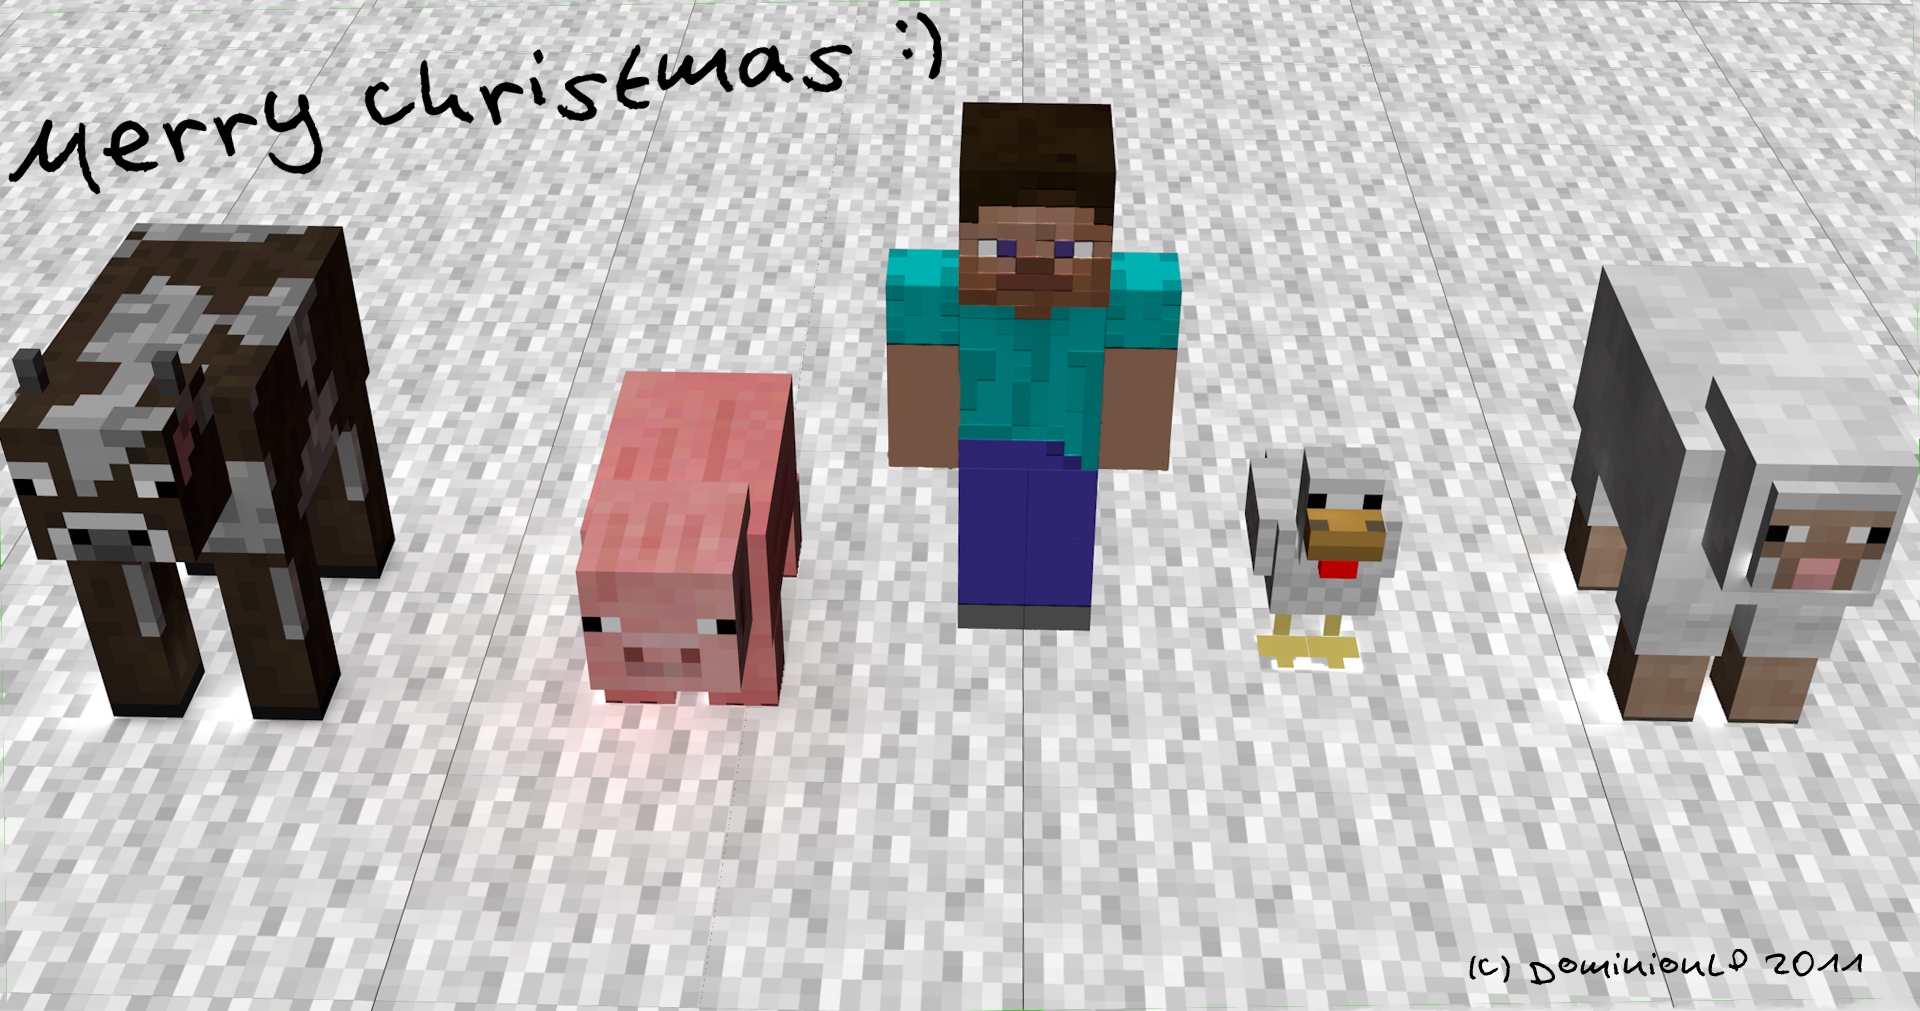 Merry Christmas Minecraft Wallpaper By Dominionlp